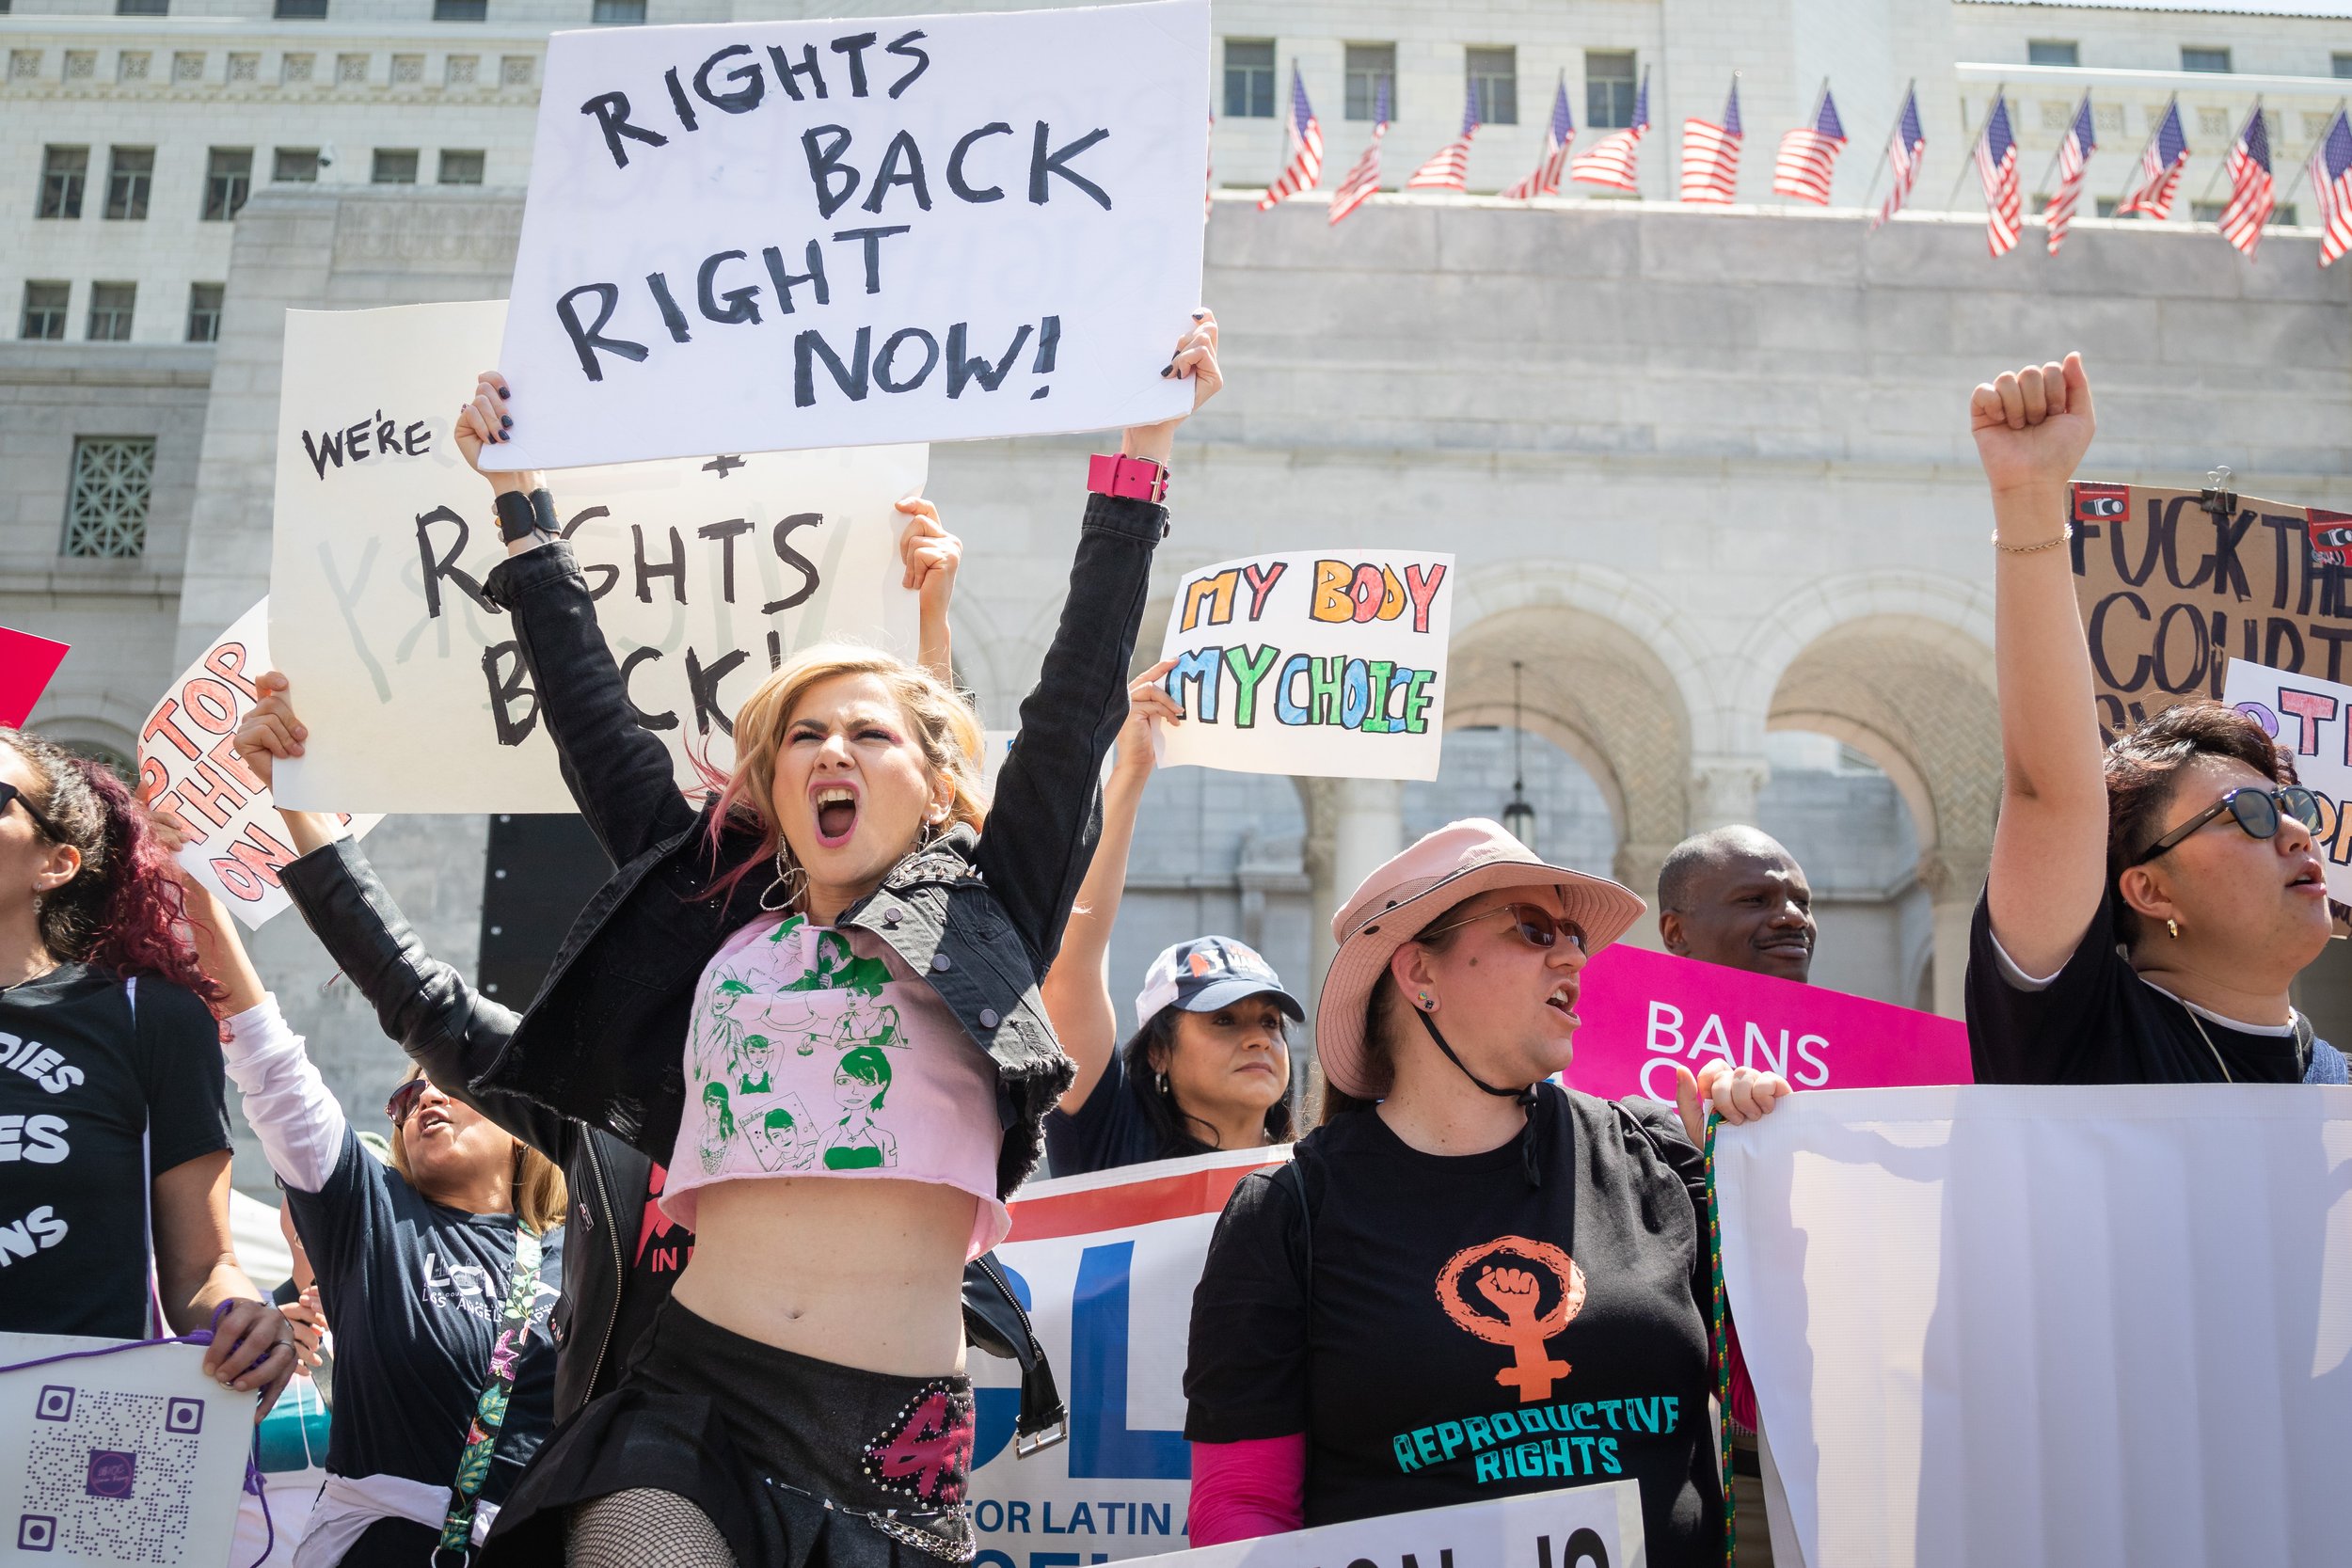  Shira Yevin (left), founder of Gritty in Pink, an organization that advocates for gender equity and equality in the music industry, holds a sign which reads "rights back, right now" during a protest organized by Women's March Foundation LA, Rise Up 